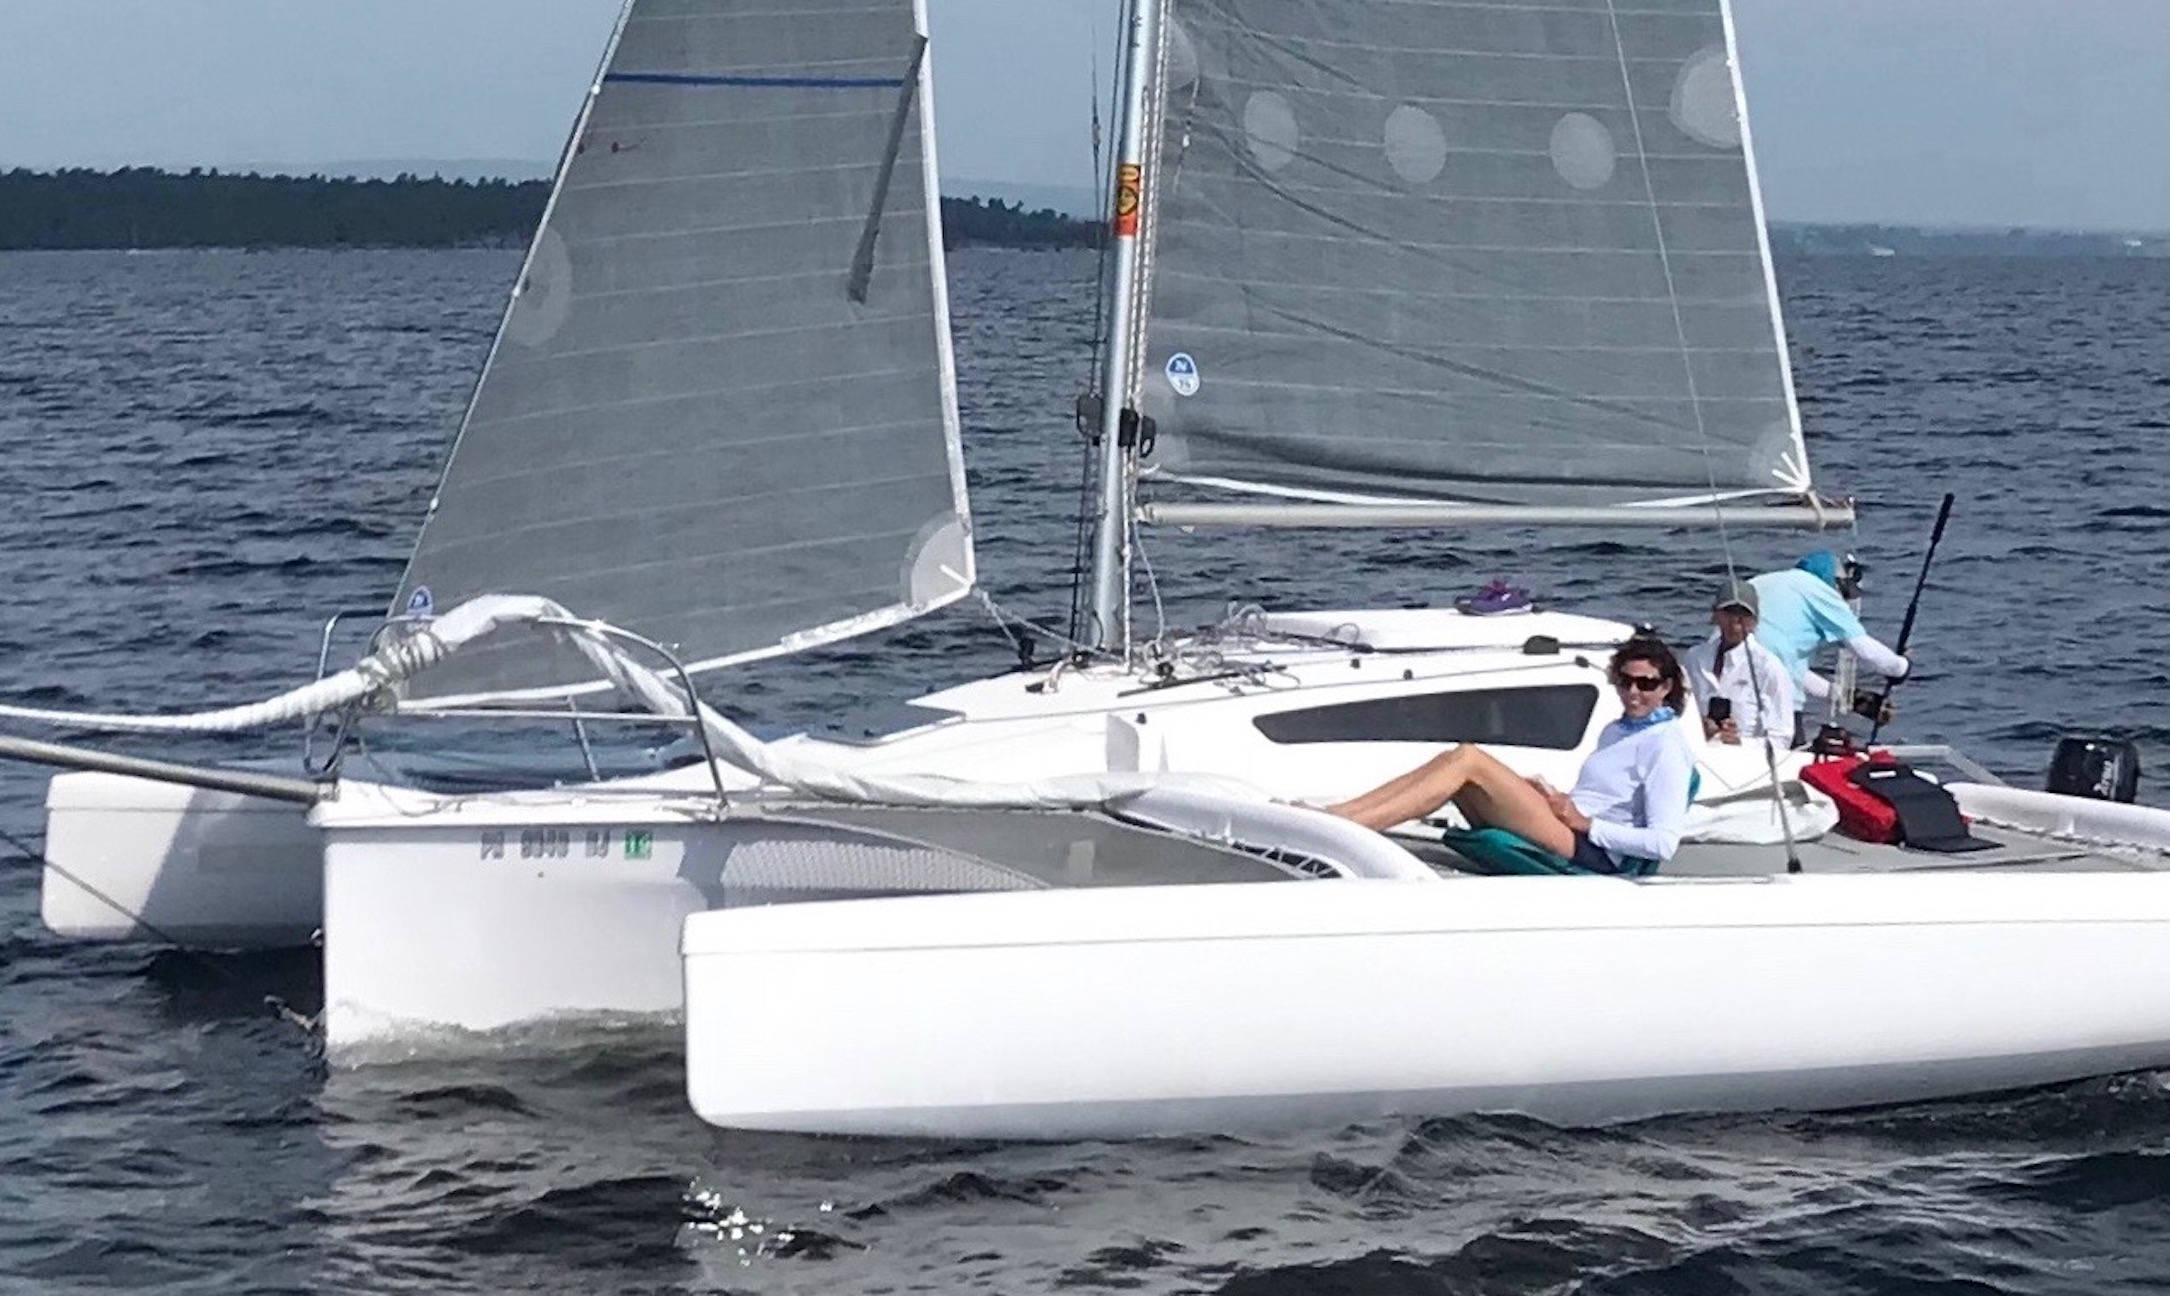 New And Used Trimarans For Sale Windcraft Multihulls Used Boat Listings